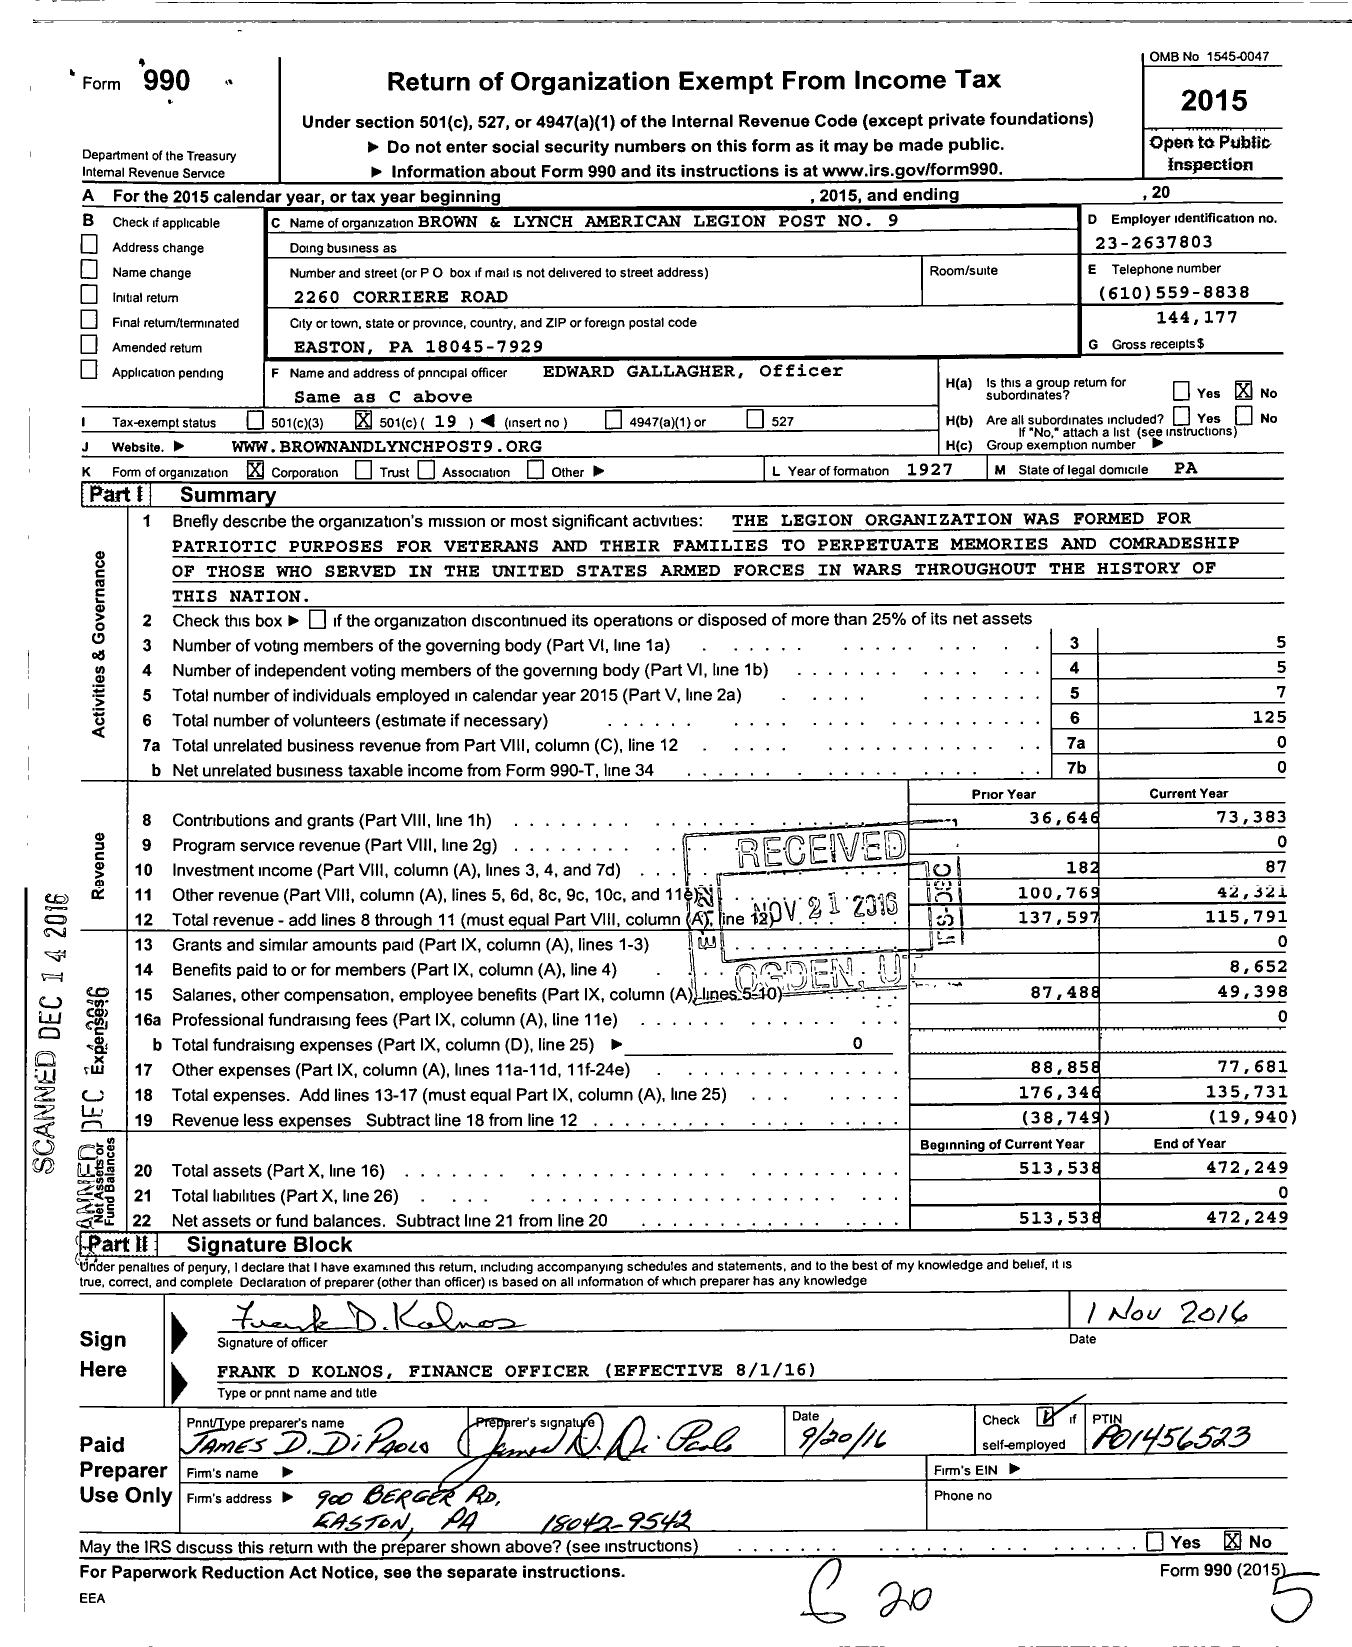 Image of first page of 2015 Form 990O for Brown and Lynch American Legion Post No 9